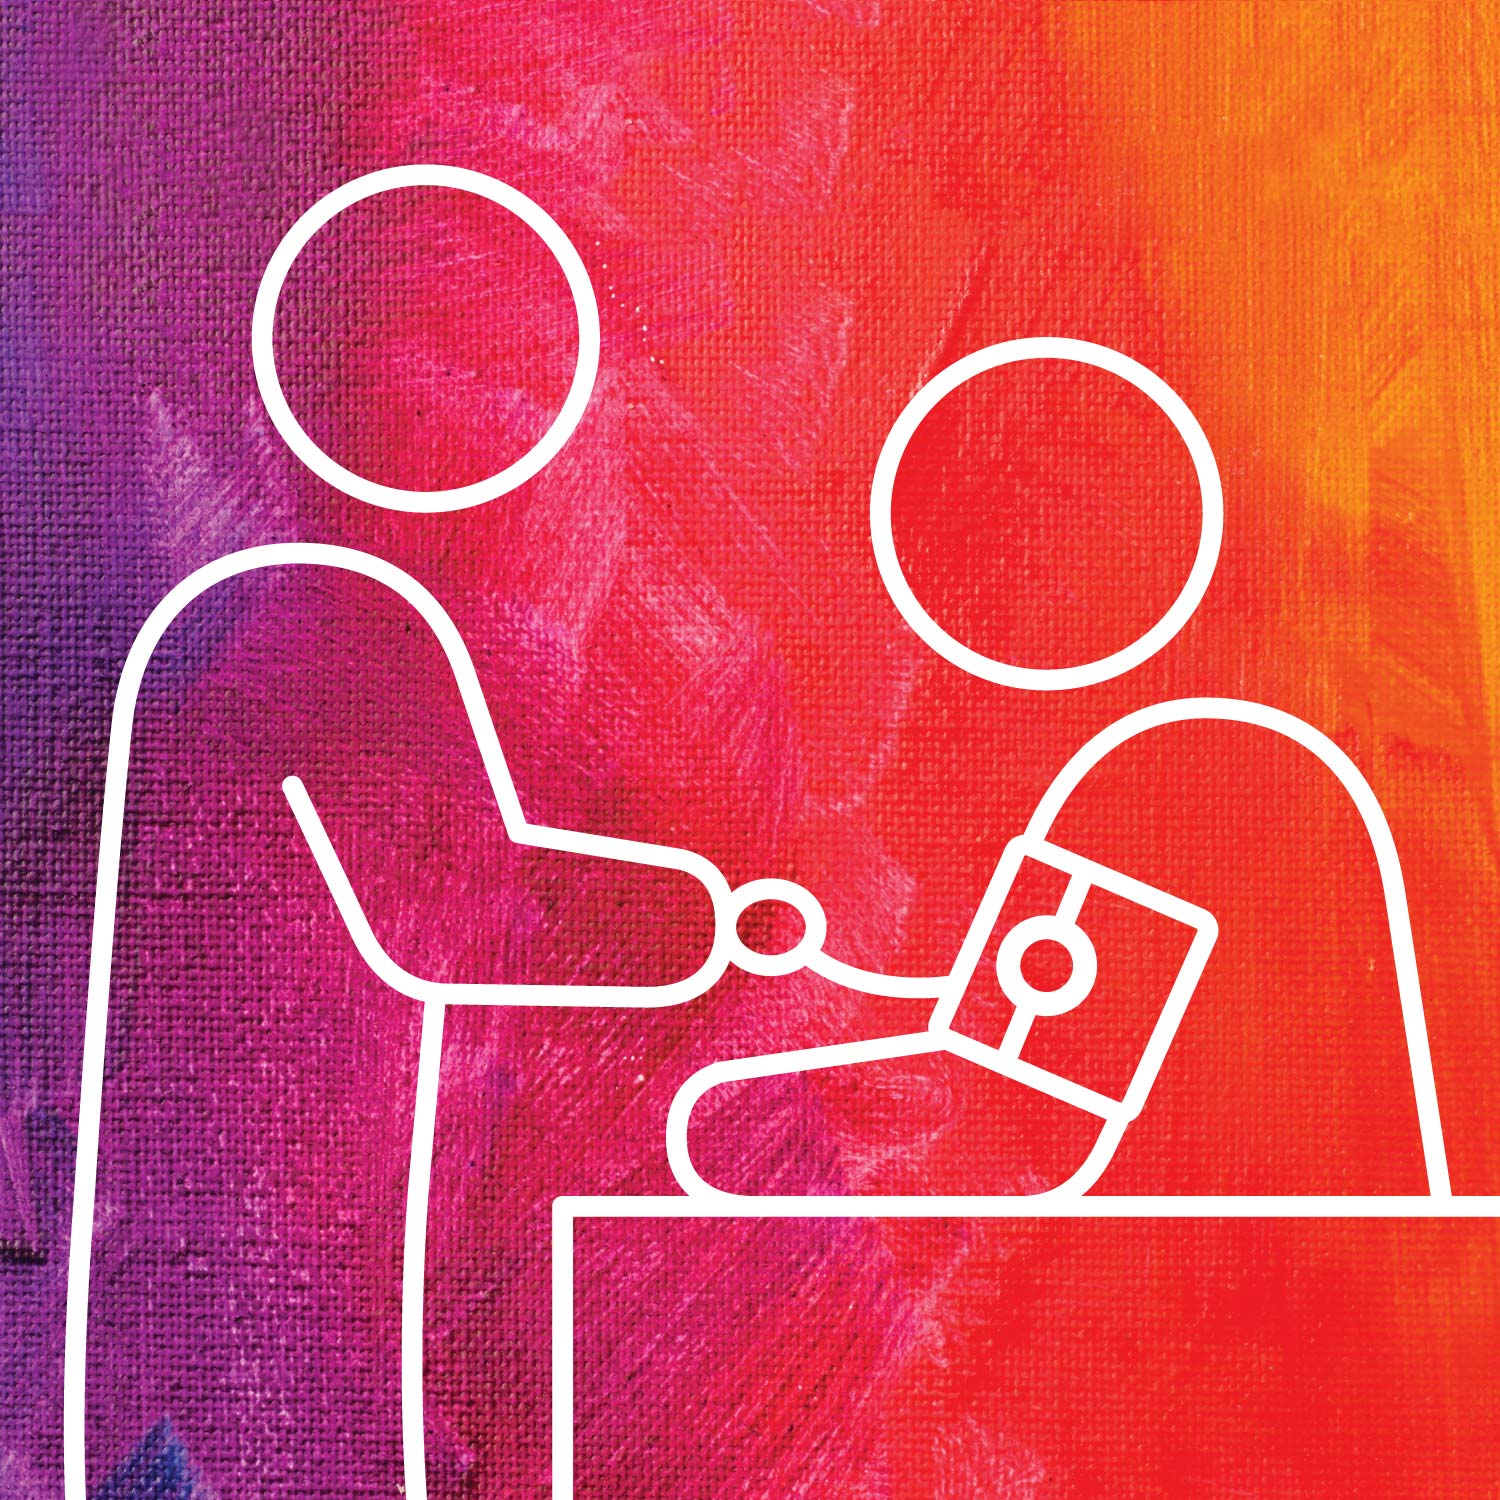 Illustration of a doctor taking a blood pressure reading of a patient